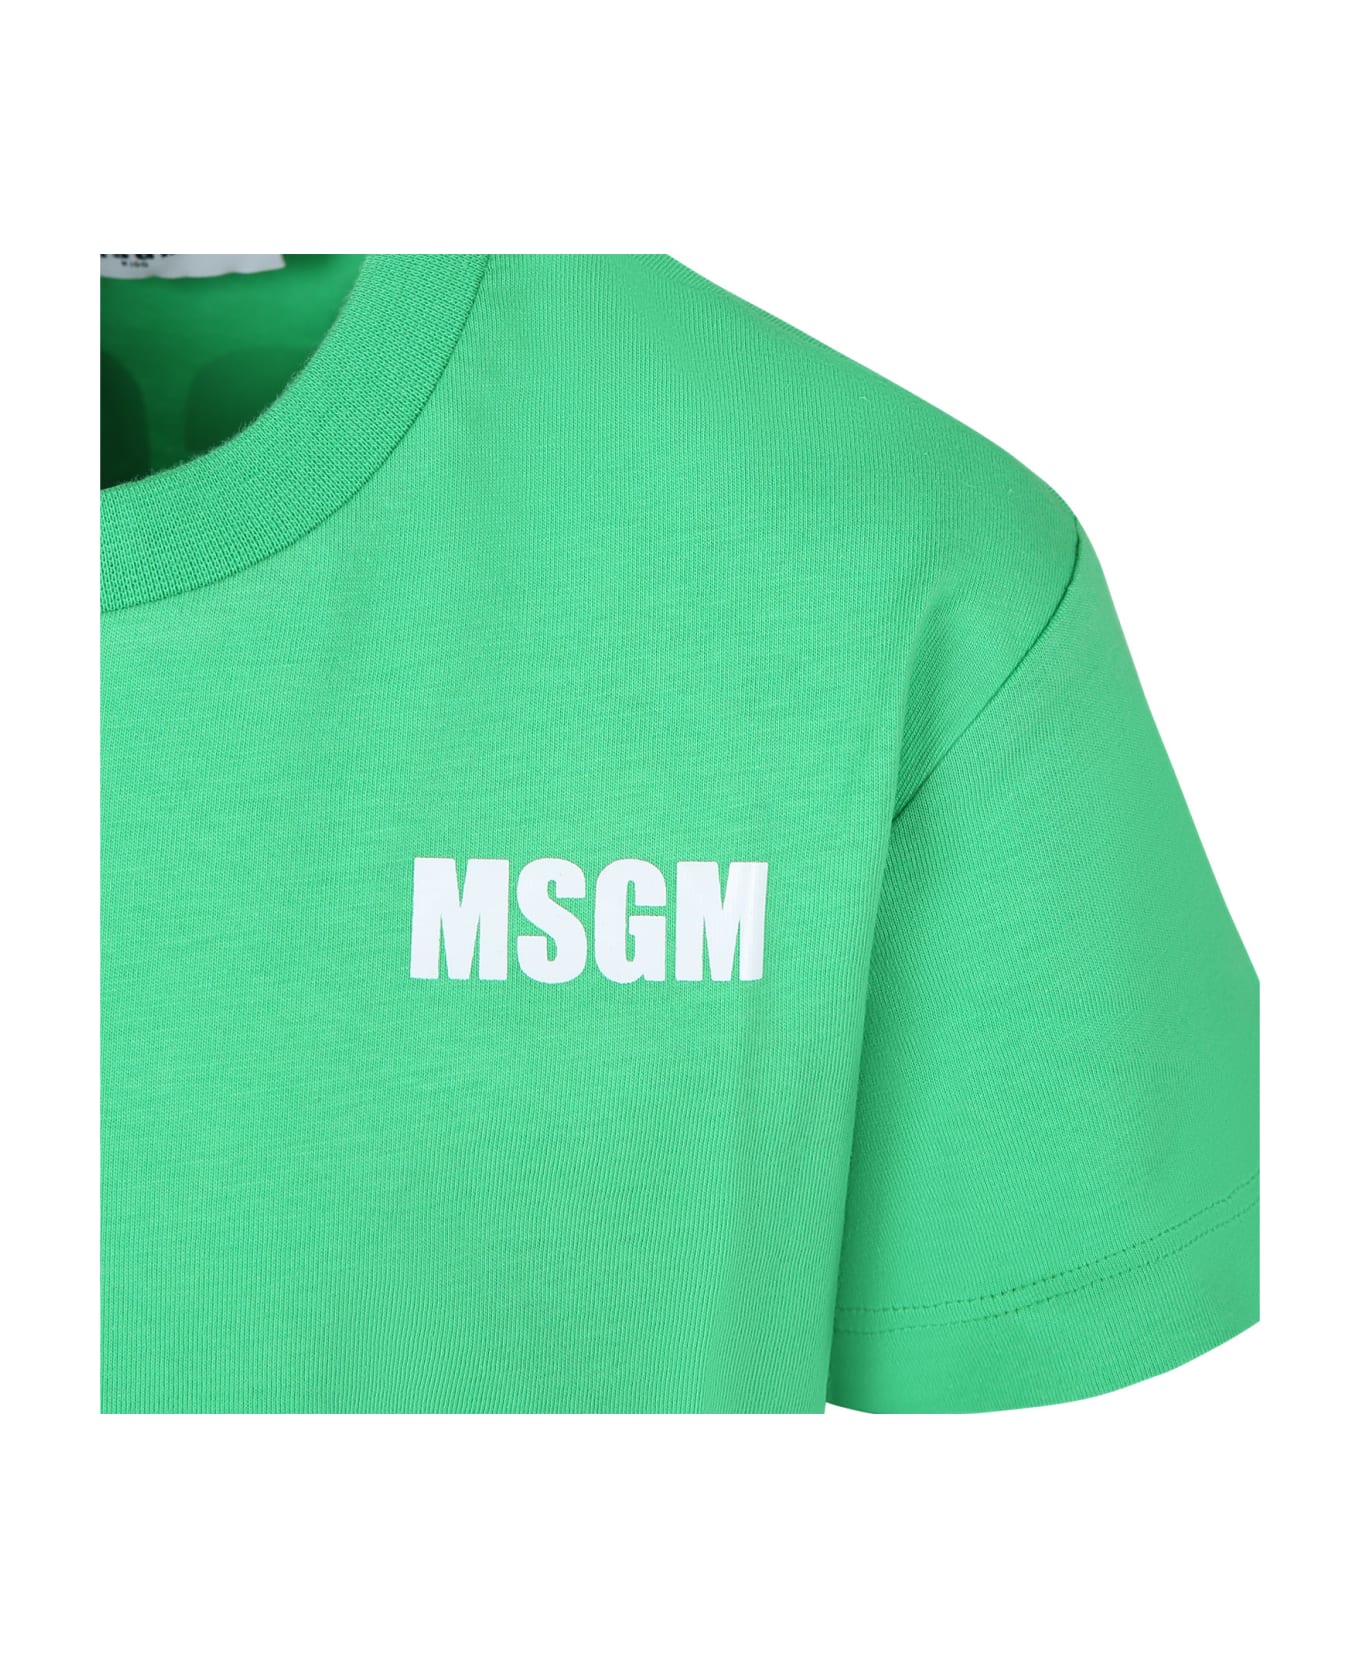 MSGM Green T-shirt For Kids With Logo - Verde